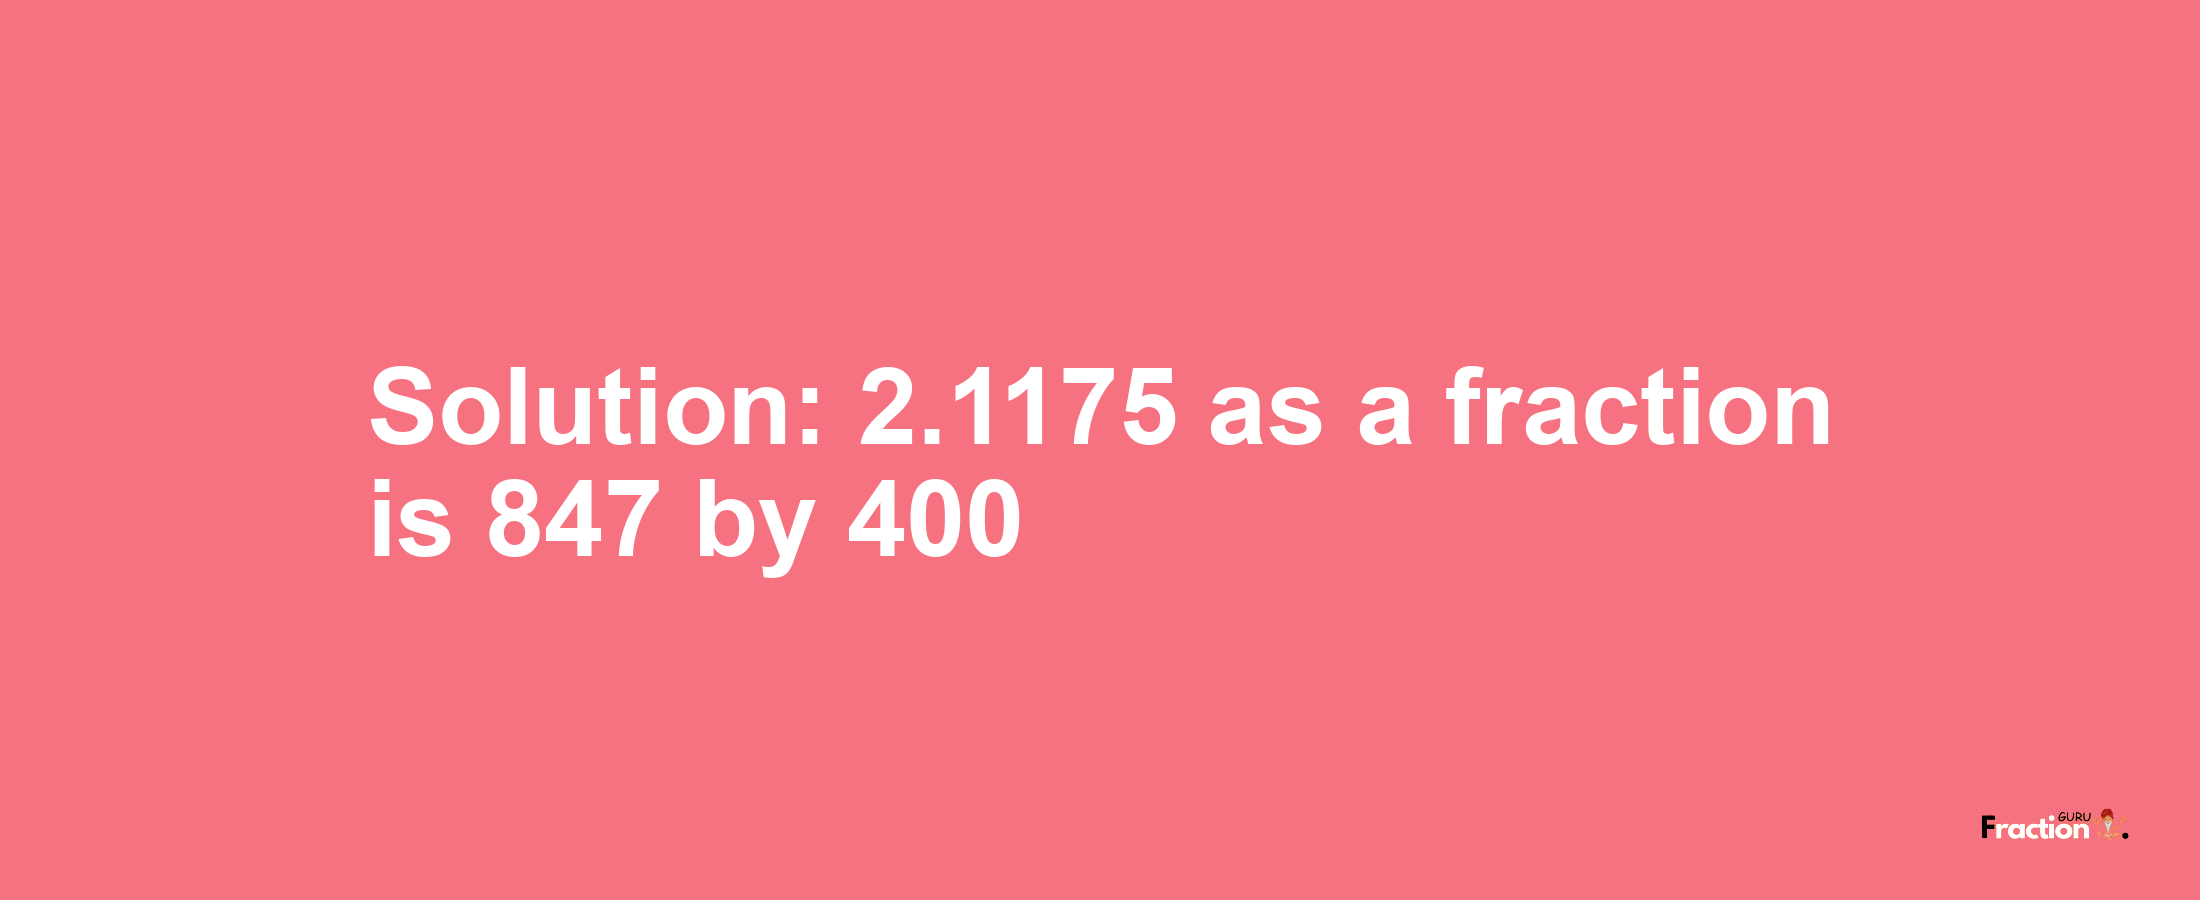 Solution:2.1175 as a fraction is 847/400